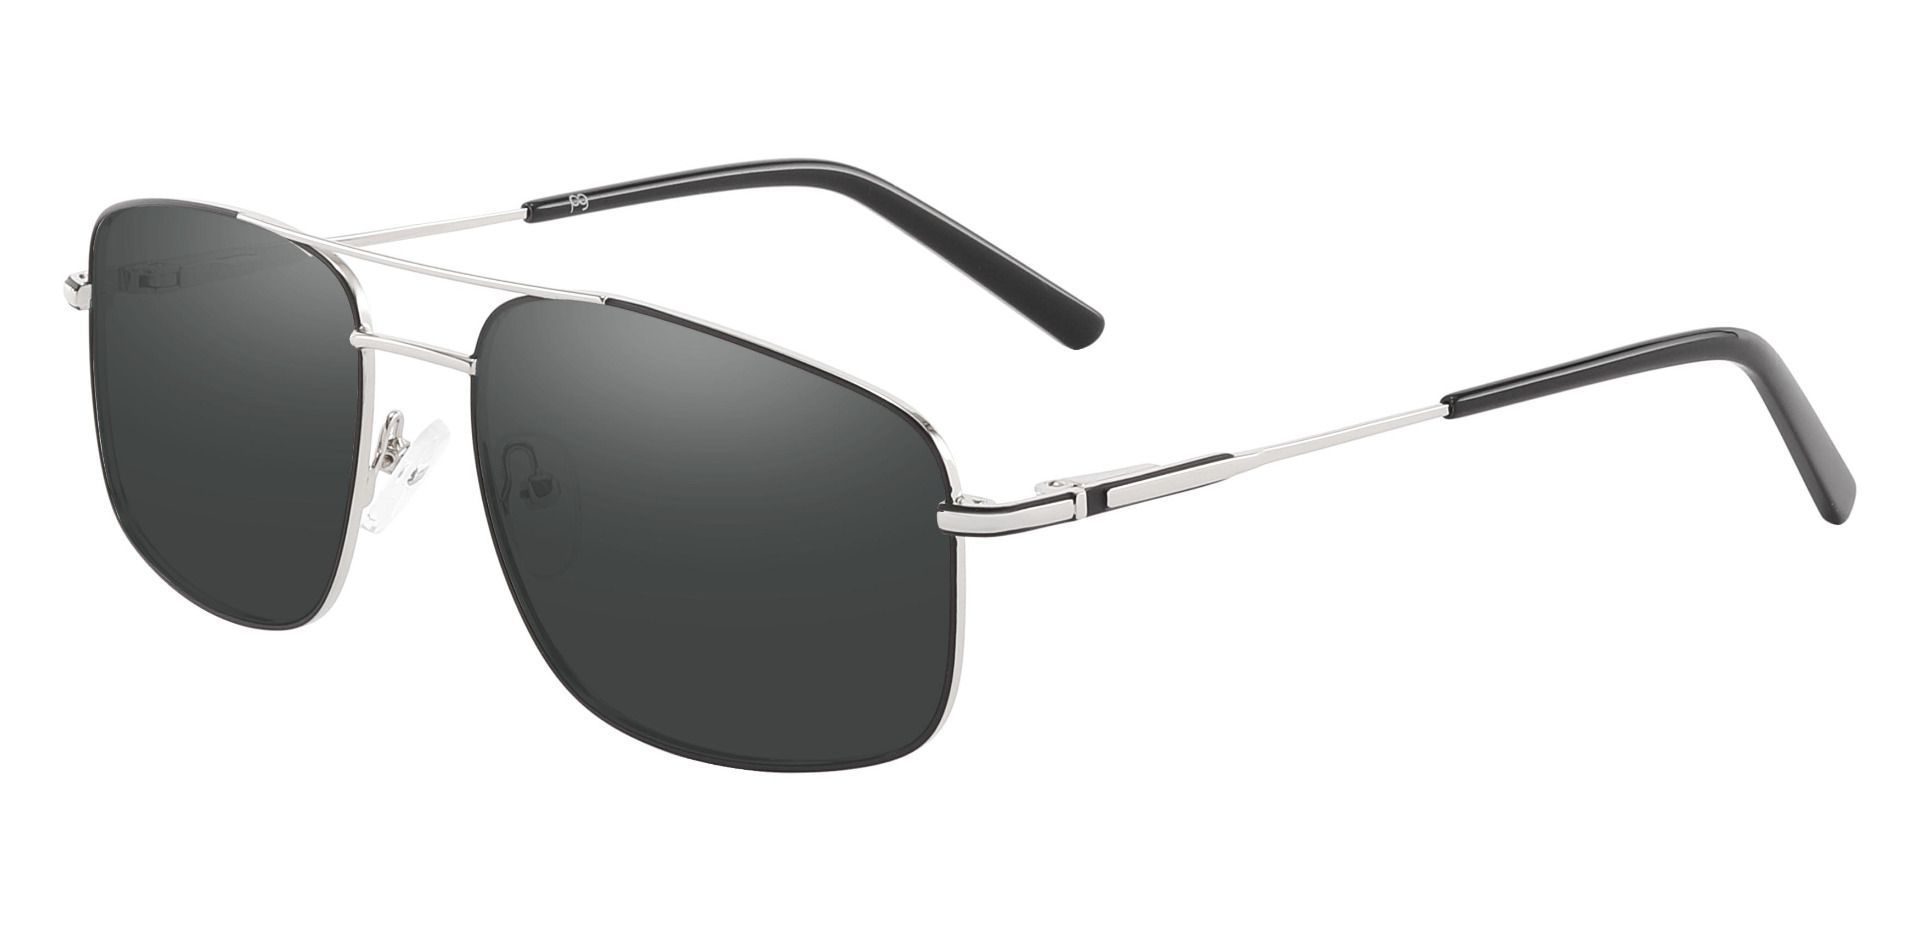 Turner Aviator Non-Rx Sunglasses - Silver Frame With Gray Lenses